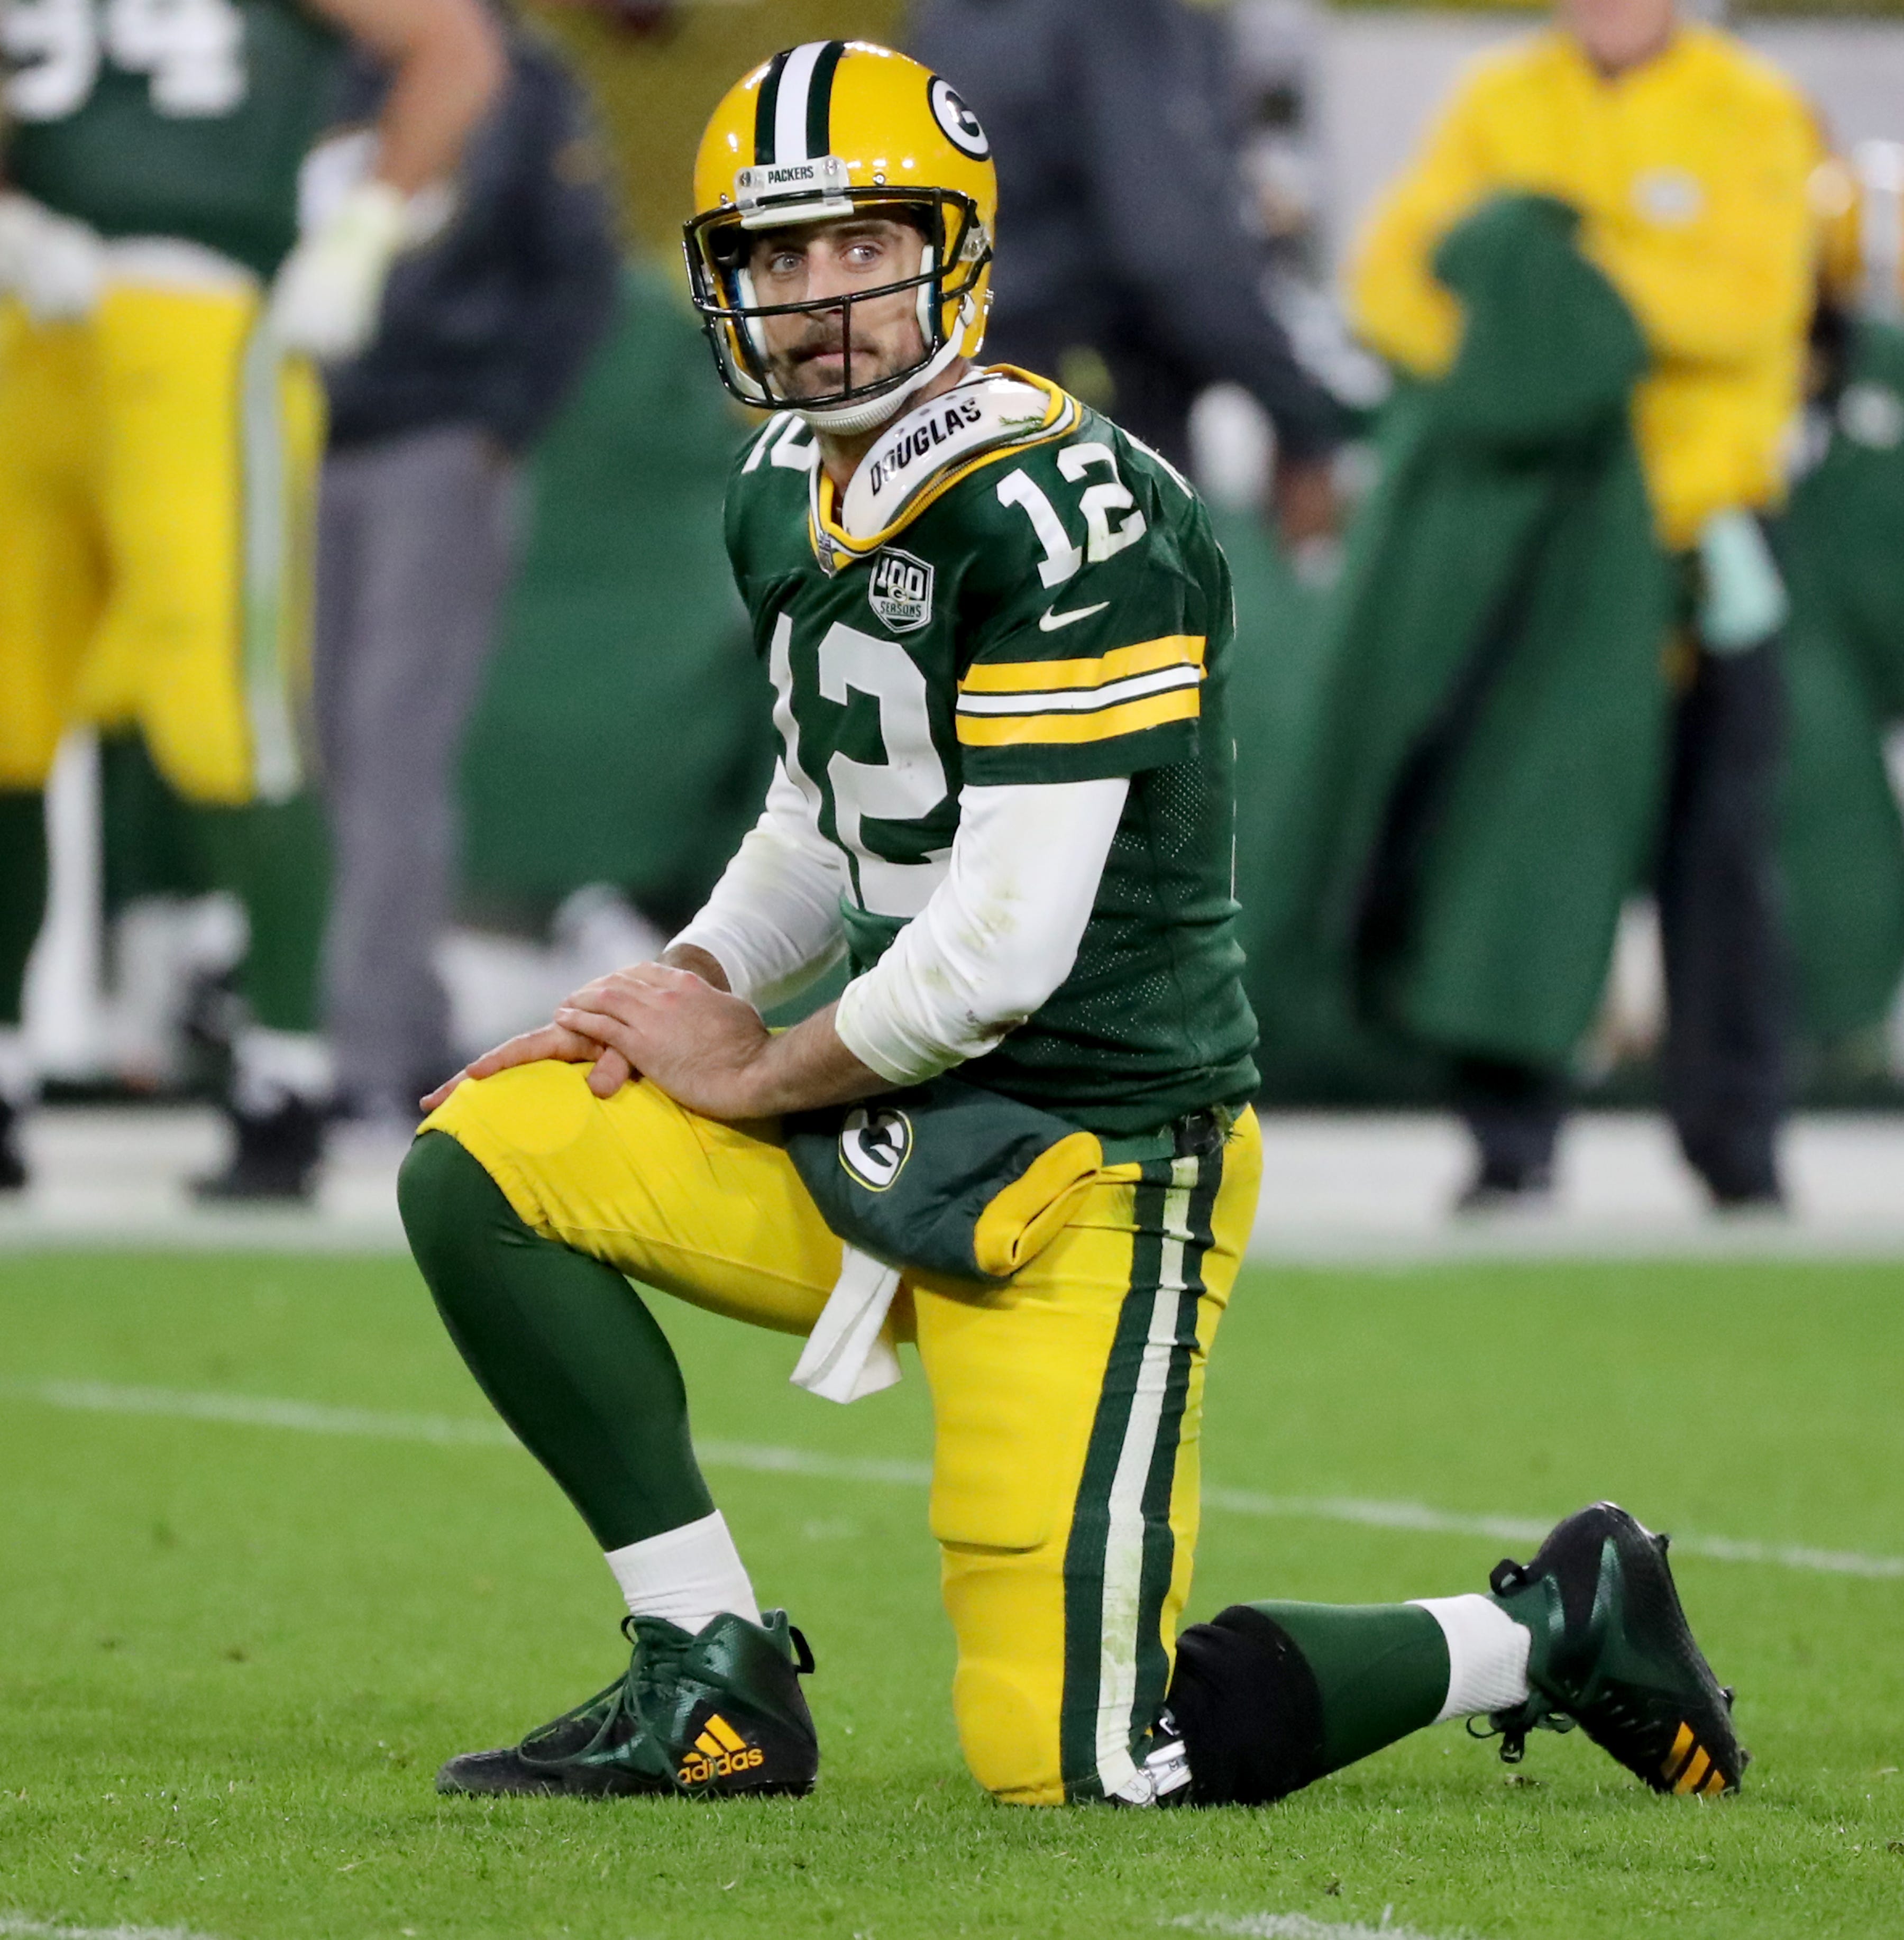 Green Bay Packers quarterback Aaron Rodgers (12) looks towards the referee after getting thrown down against the San Francisco 49ers at Lambeau Field Monday, October 15, 2018 in Green Bay, Wis.